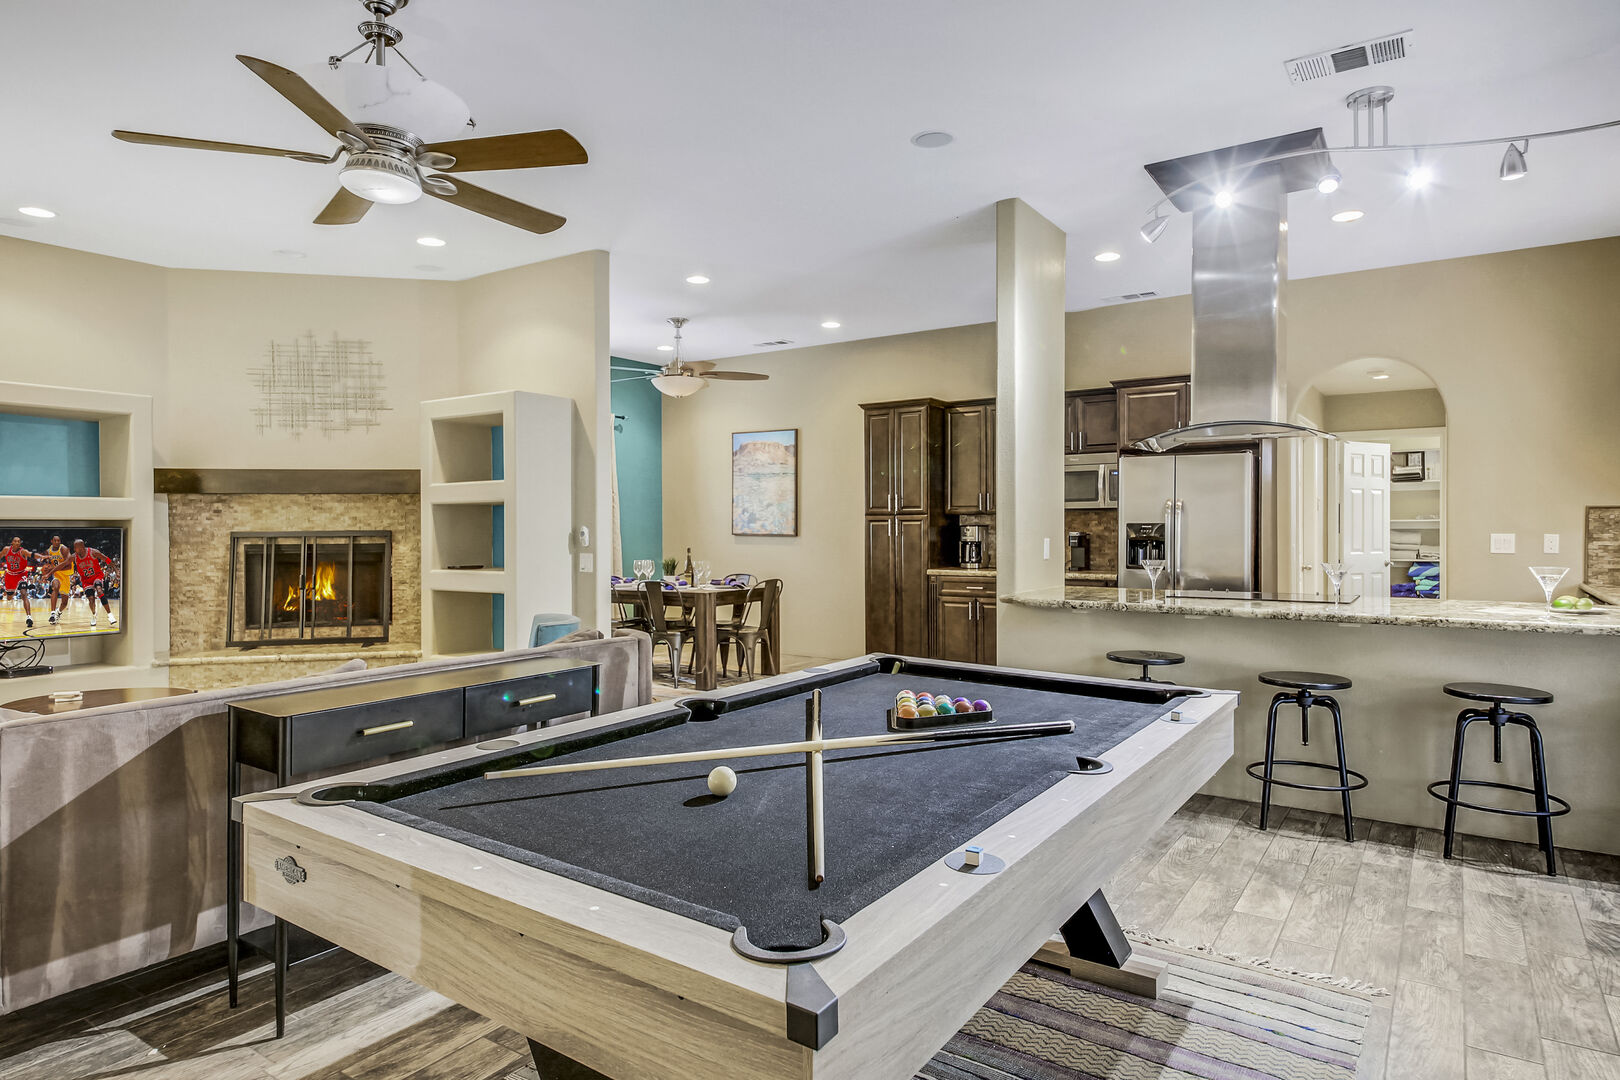 The open floor plan allows for easy mingling.